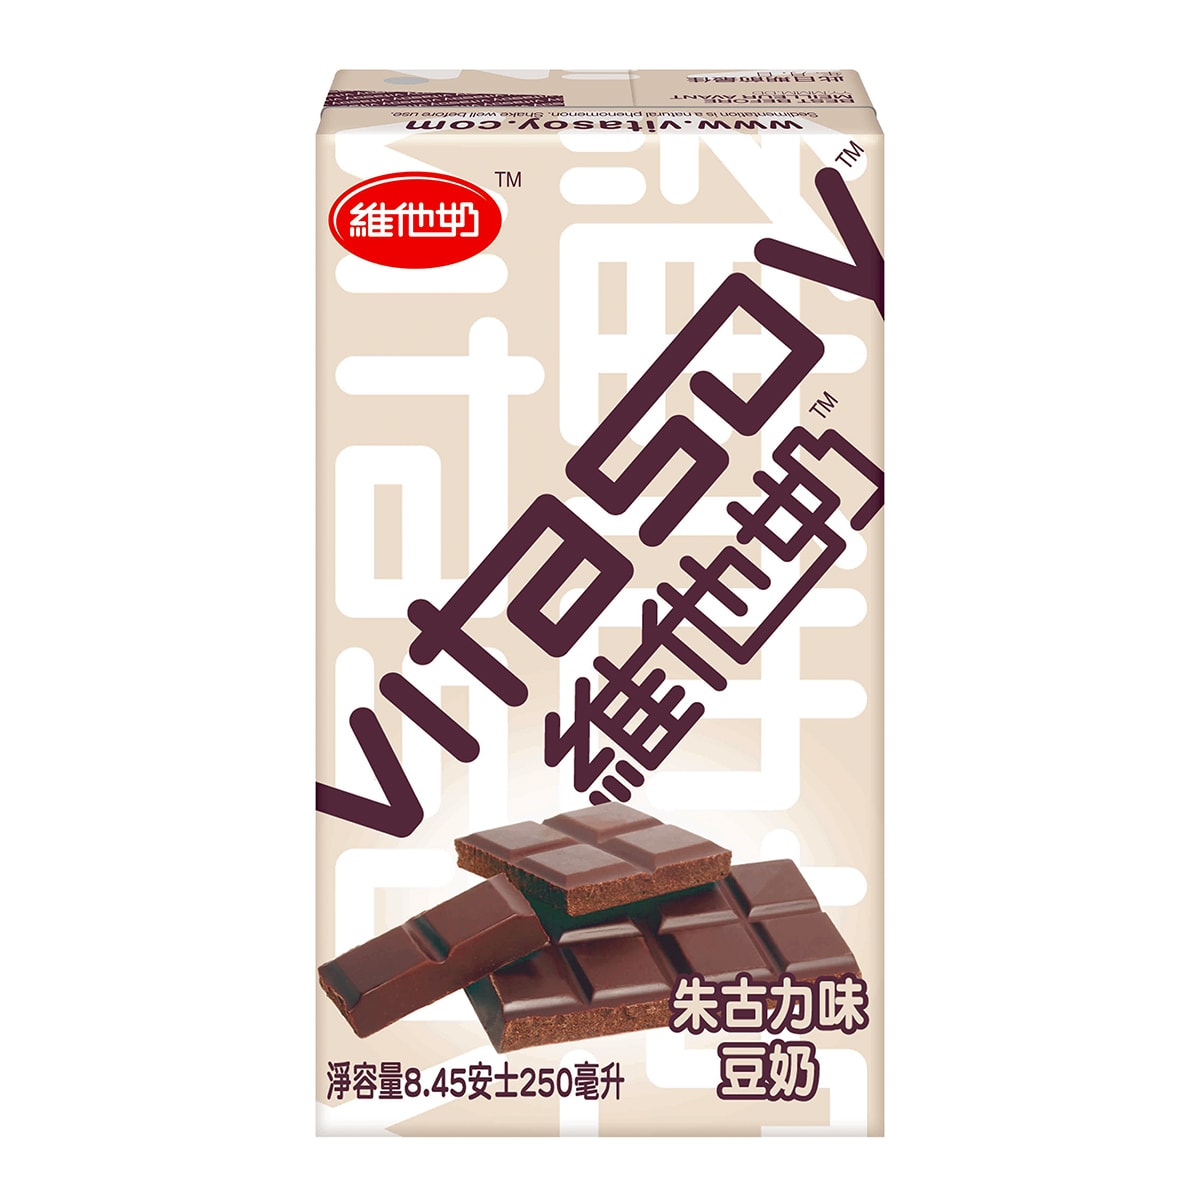 Yamibuy.com:Customer reviews:Chocolate Flavored Soy Drink 250ml